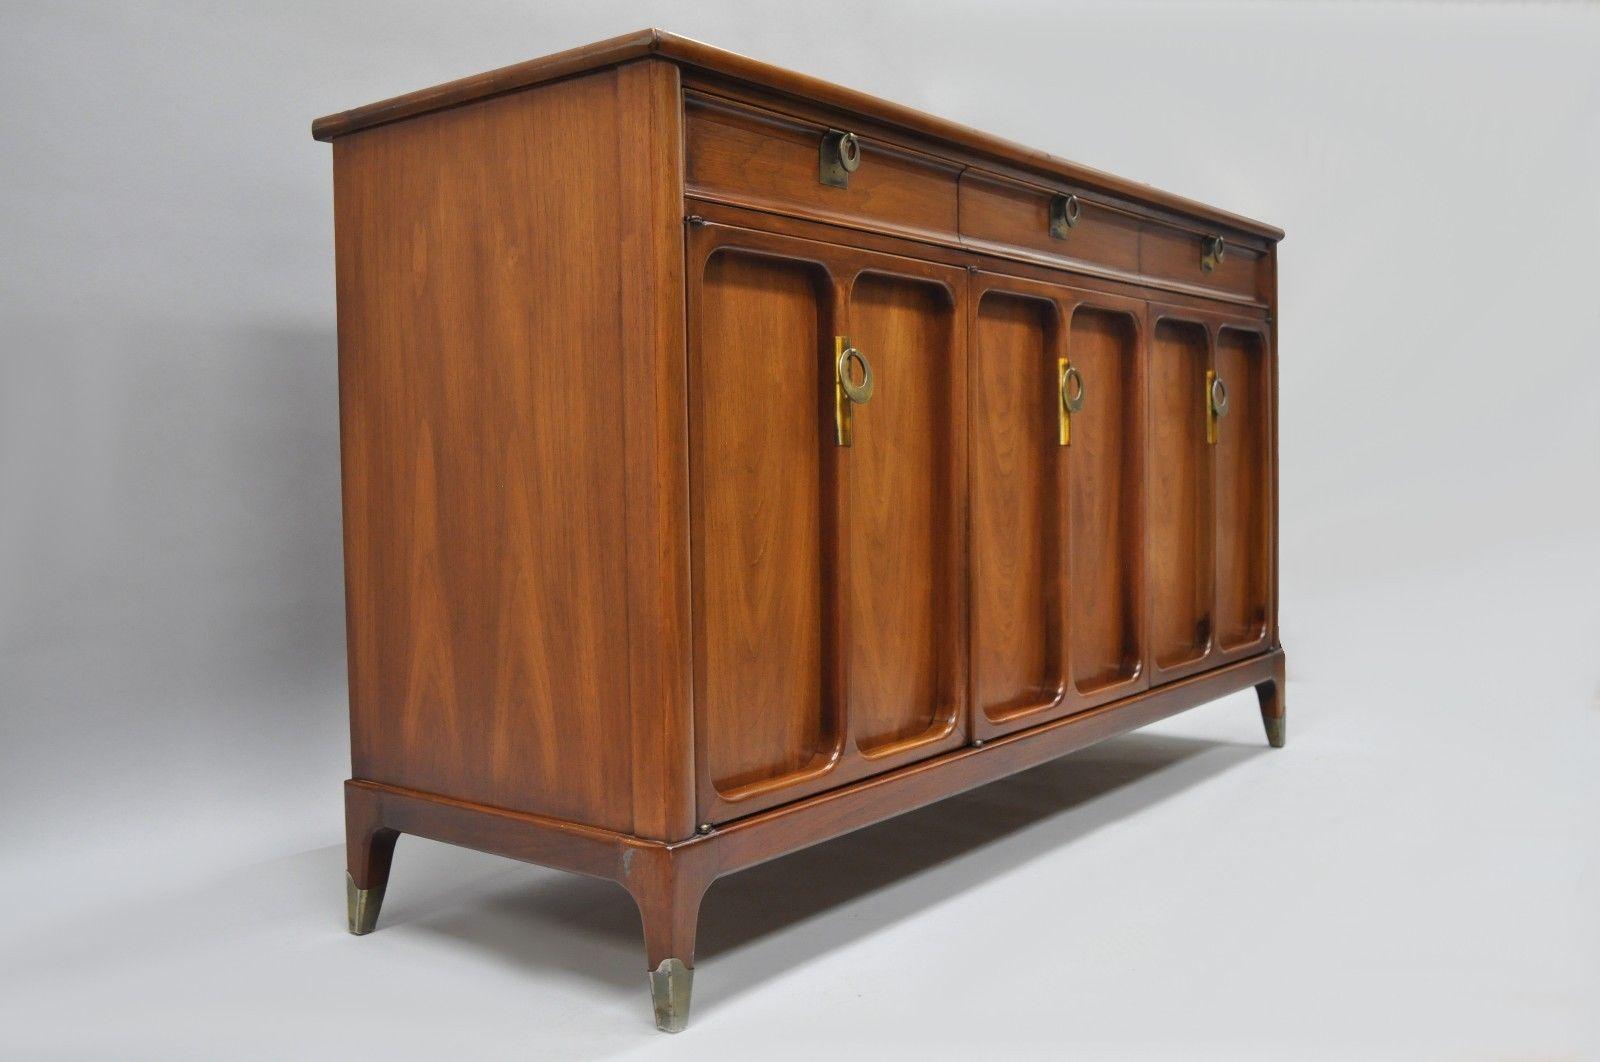 James Mont style walnut sideboard by White Furniture Company. Item features beautiful woodgrain, three swing doors, three dovetailed drawers, two wooden shelves, tapered legs, brass capped feet, unique drop pulls, clean modernist lines, quality